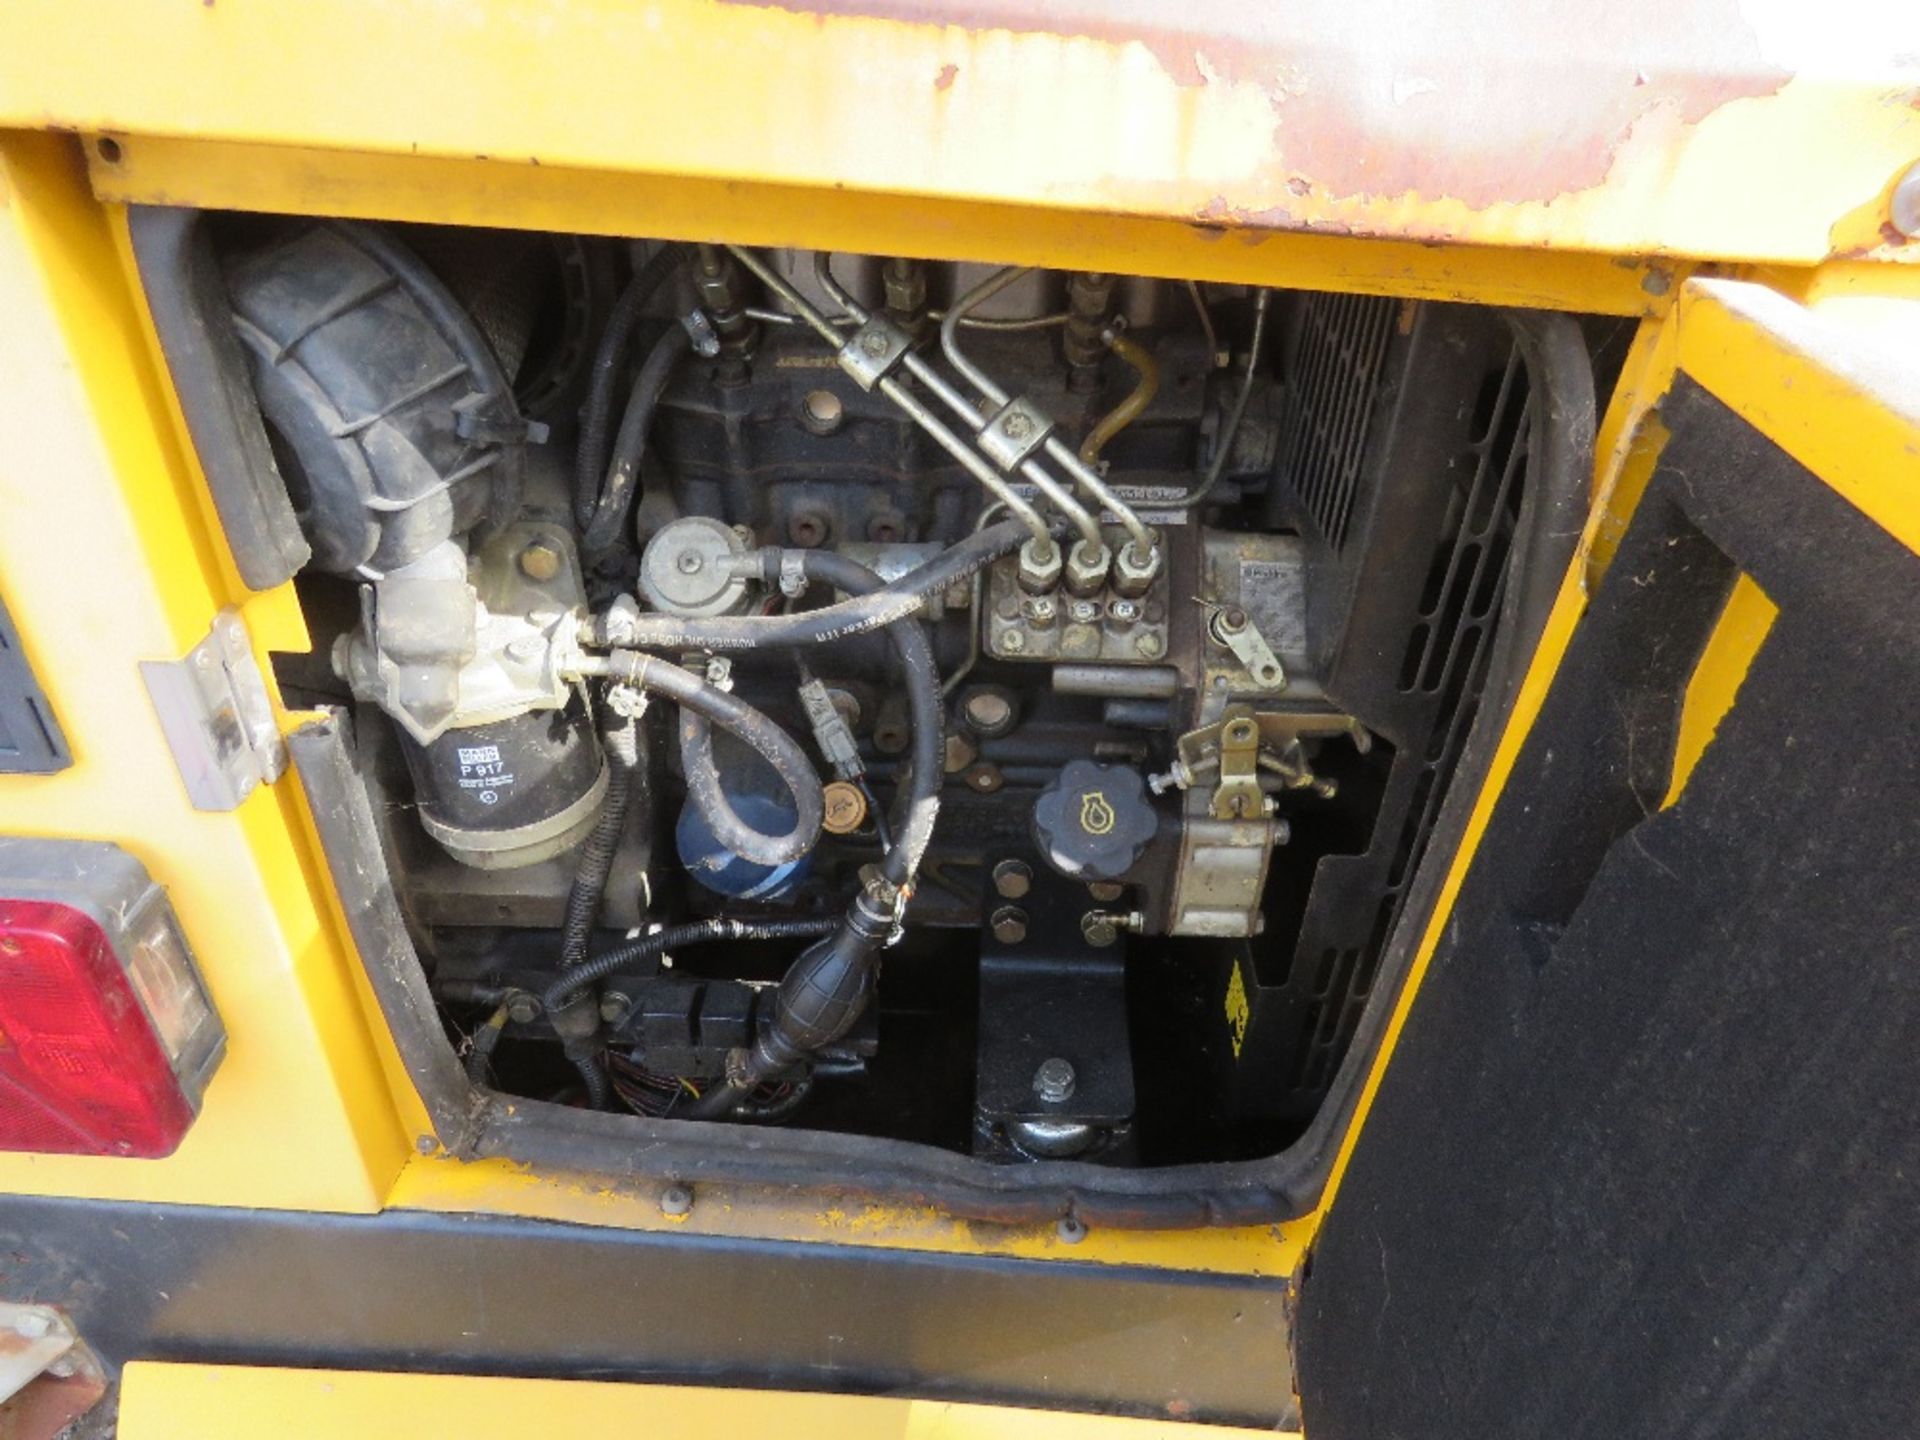 SMC TL90 TOWED TOWER LIGHT, PERKINS ENGINE, UNTESTED, BEEN IN LONG TERM STORAGE, CONDITION UNKNOWN. - Image 2 of 4